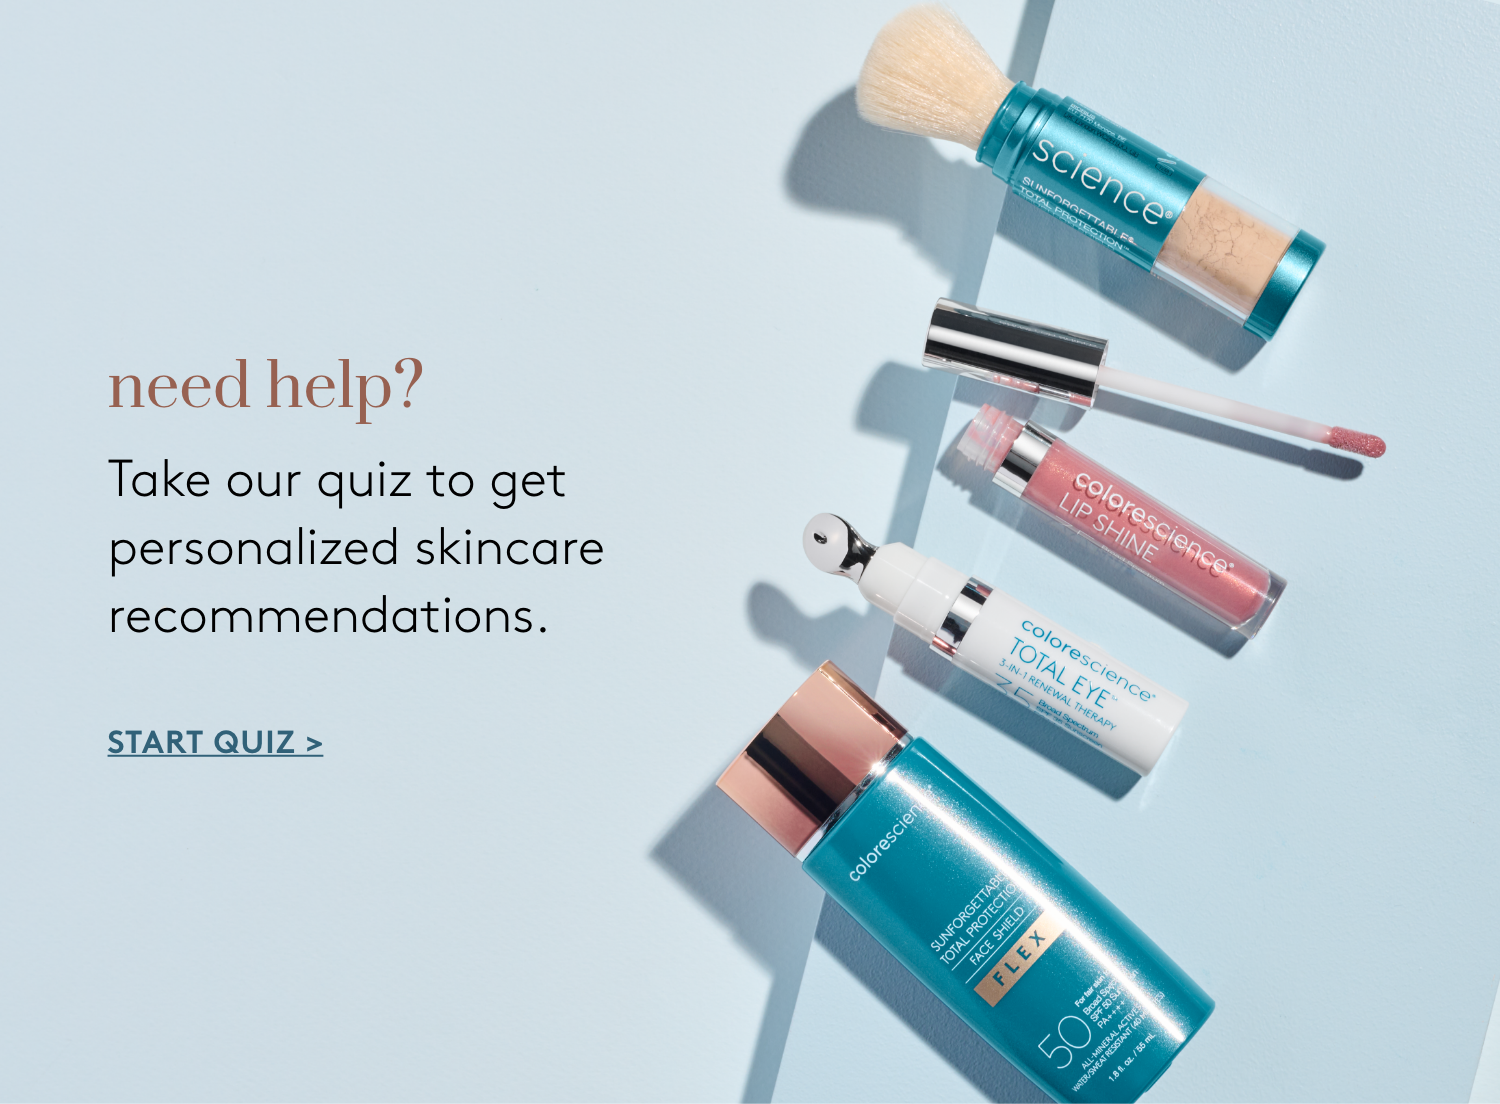 Need help? Take our quiz to get personalized skincare recommendations. START QUIZ >